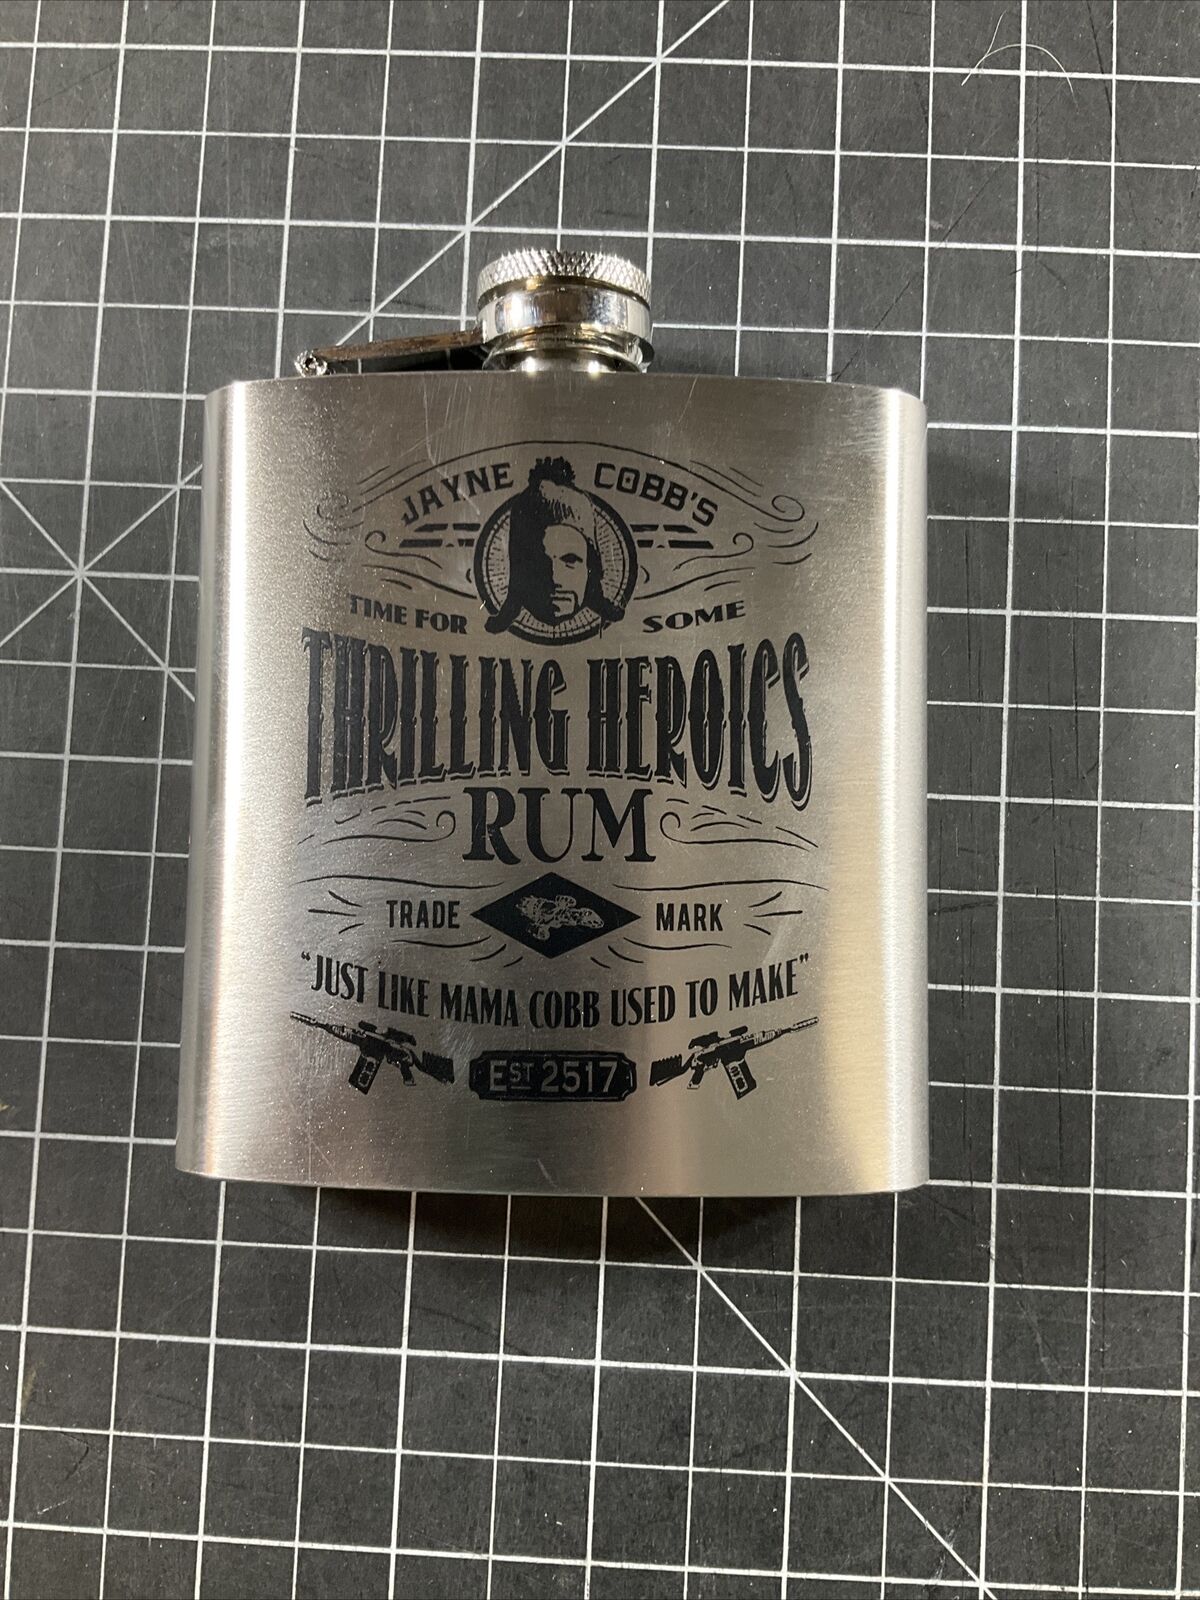 Firefly Stainless Steel 6 oz. Hip Flask - Jayne Thrilling Heroics LootCrate THG